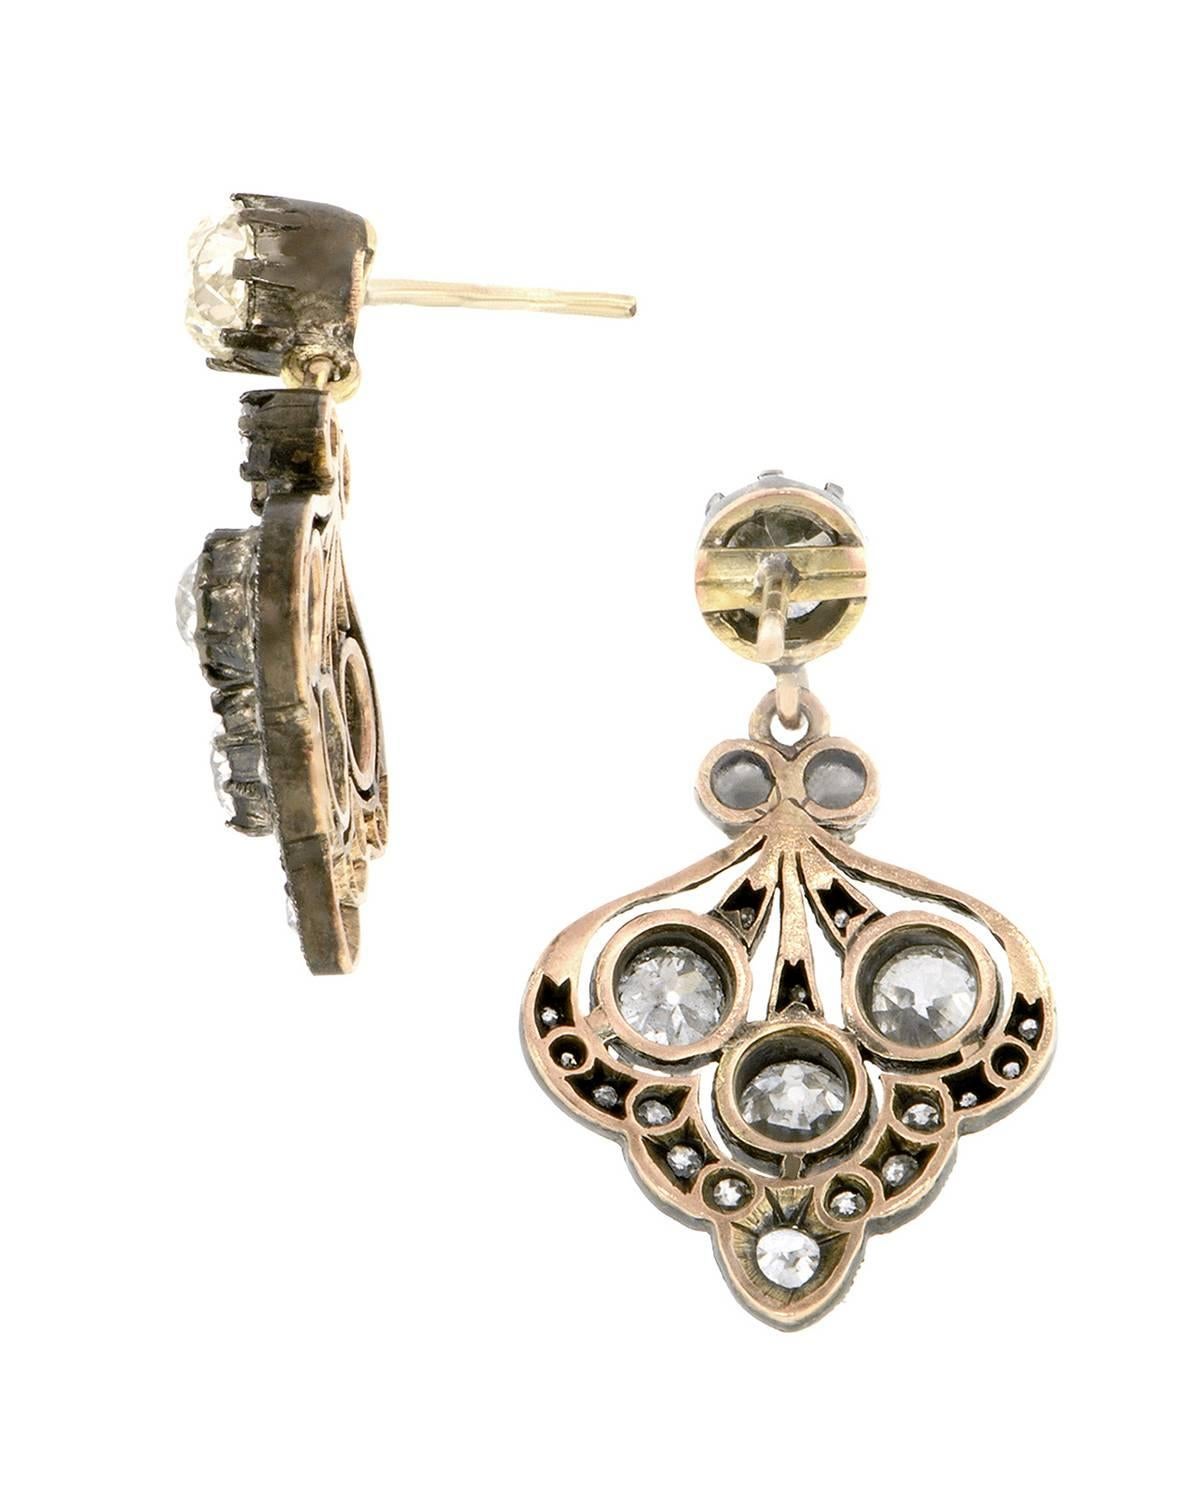 Diamond drop earrings measuring app. 2 1/8 x 11/16 inch wide, featuring Old Mine cut, Old European cut, Round Brilliant cut & Single cut diamonds, all weighing app. 4.68ctw.(top stones app. 0.80ct & 0.88ct), in an antique-style design, fashioned in